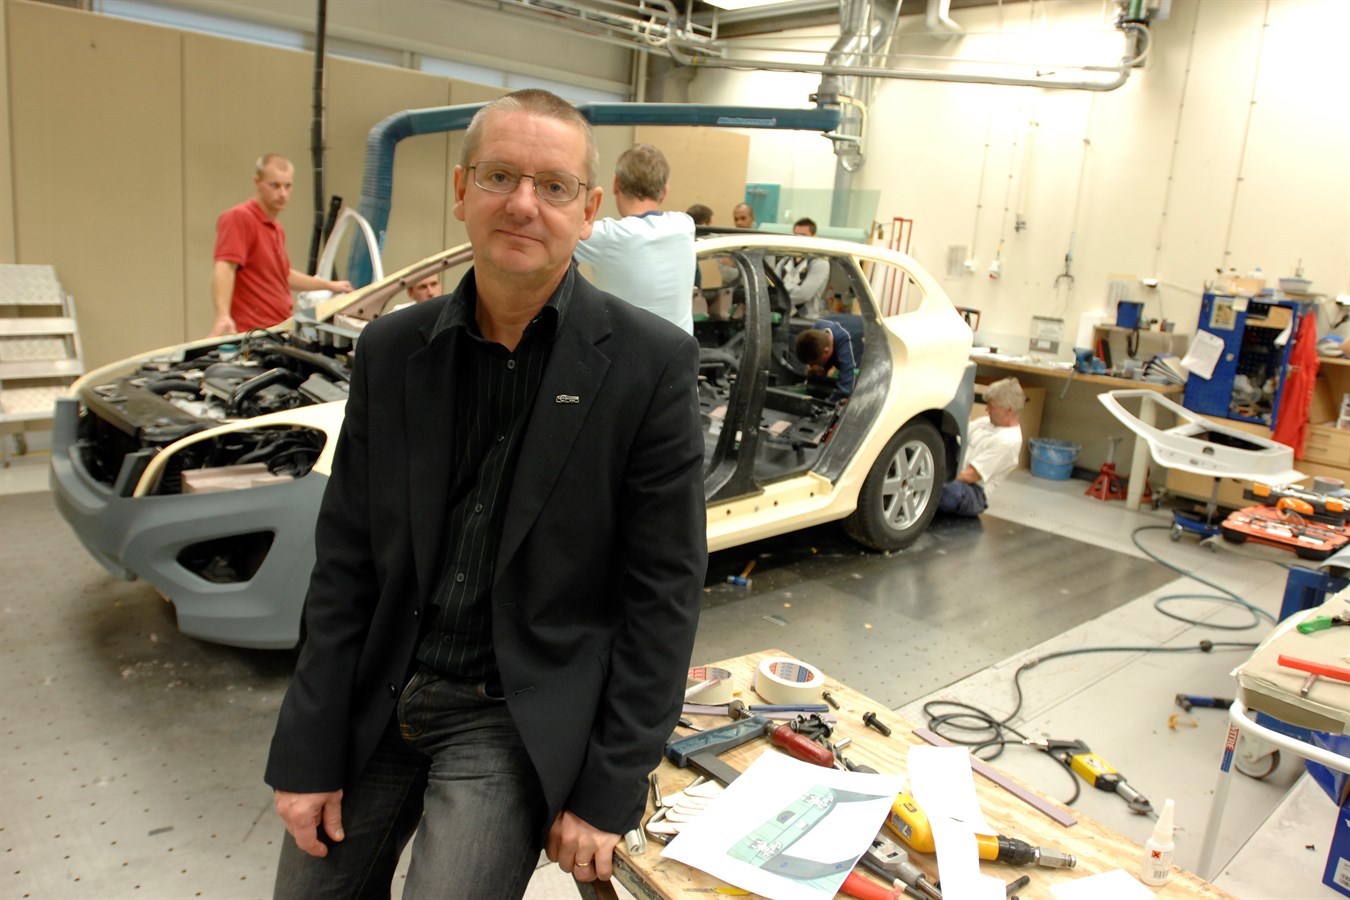 Magnus Sundemo, was the project director for the XC60 Concept